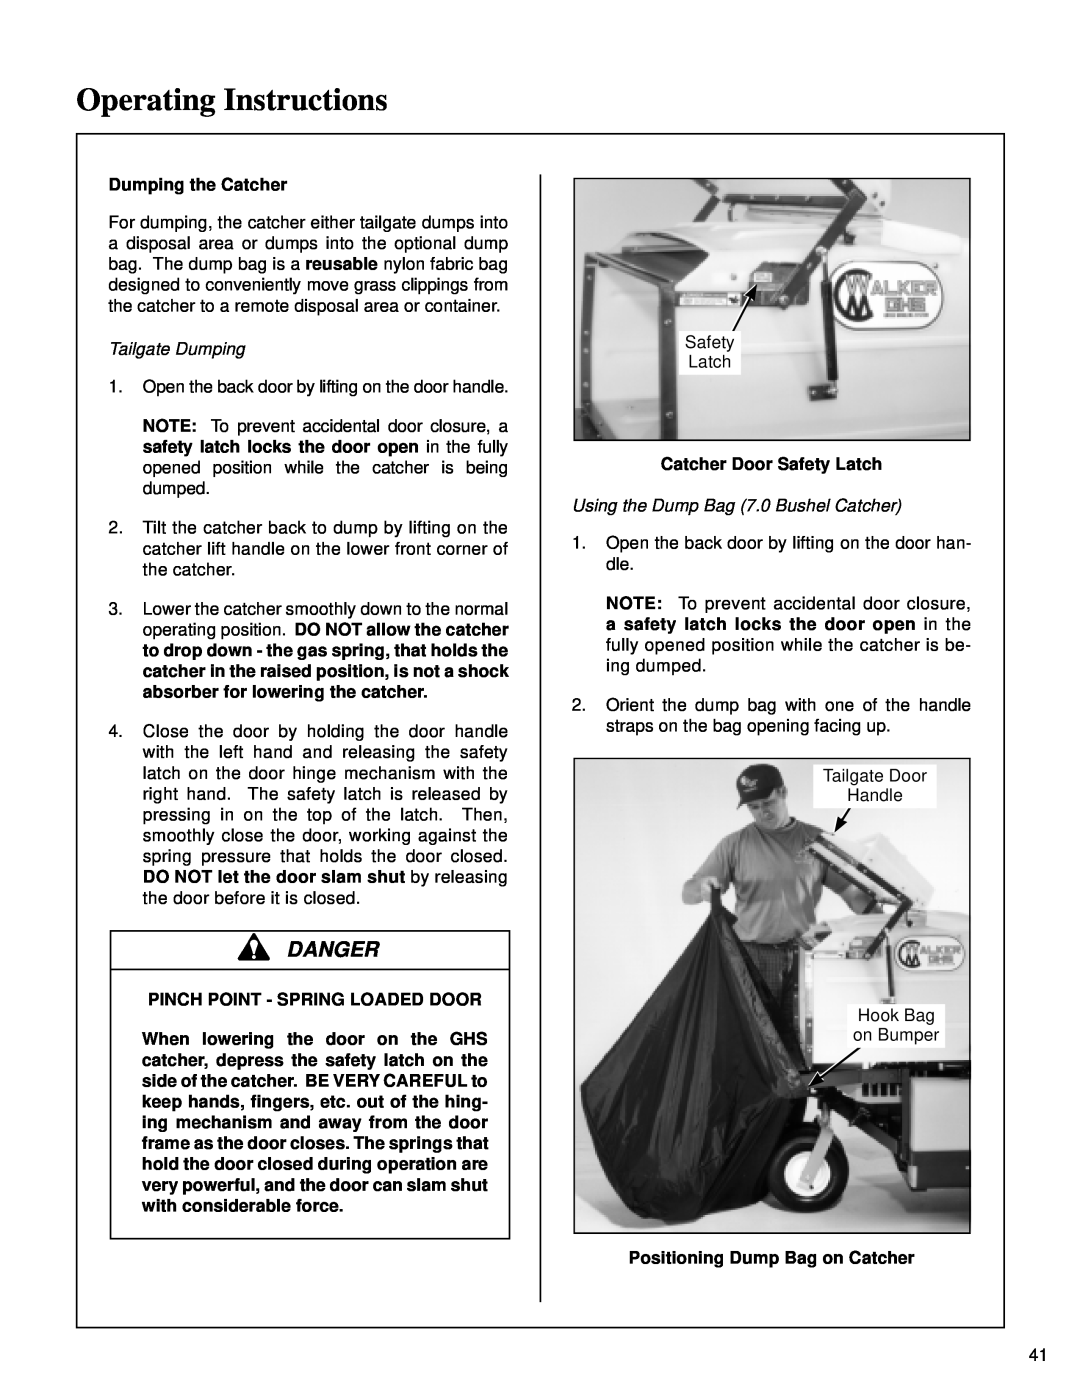 Walker MT Operating Instructions, Danger, Dumping the Catcher, Tailgate Dumping, Pinch Point - Spring Loaded Door 